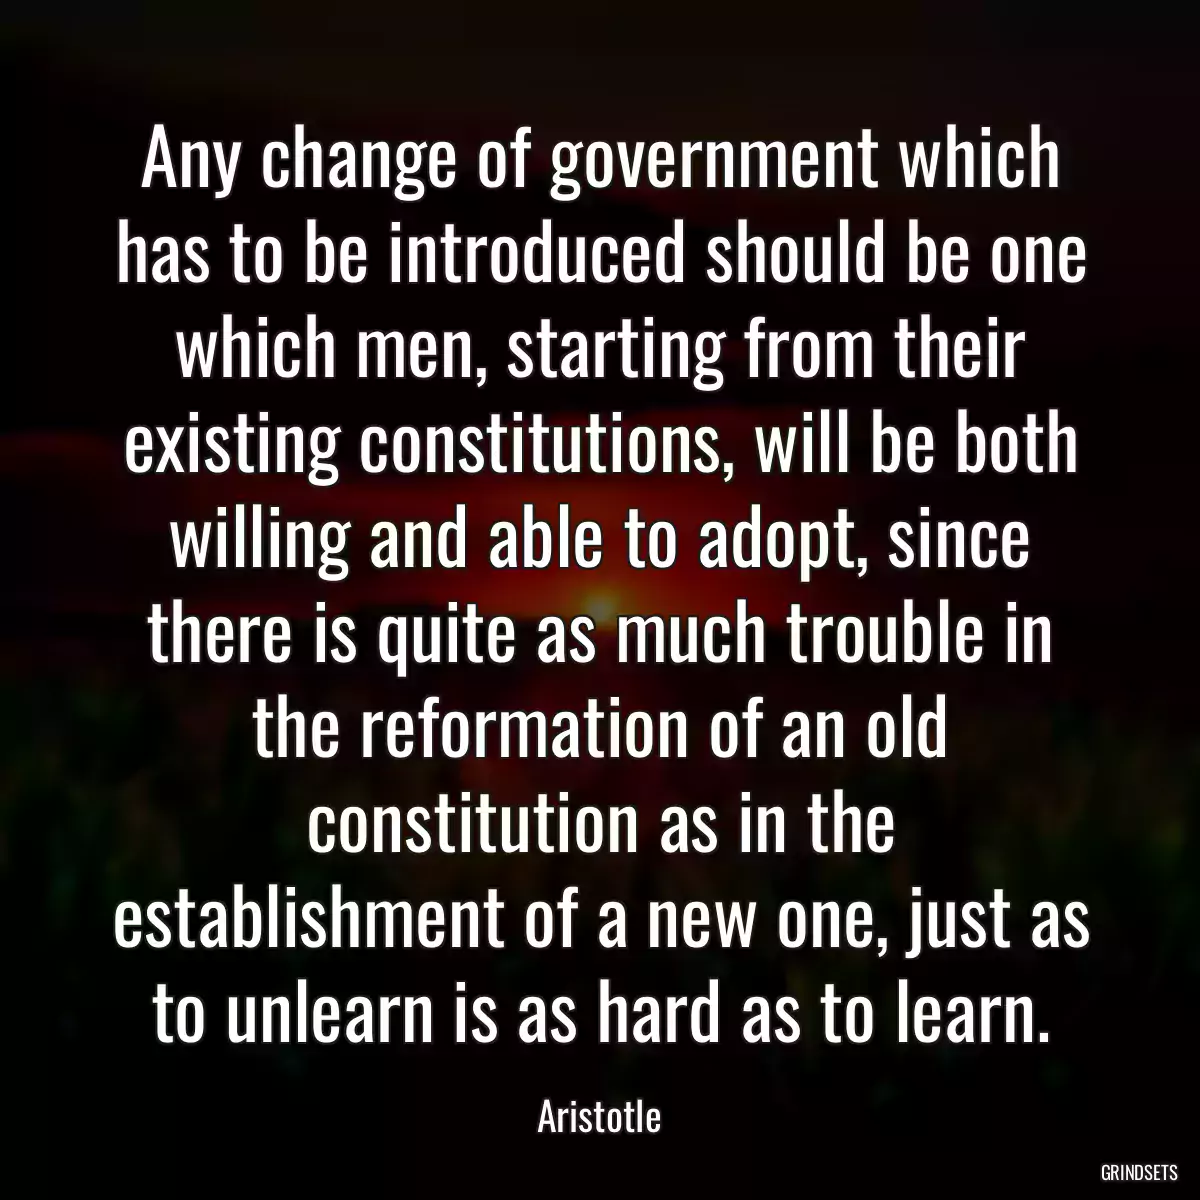 Any change of government which has to be introduced should be one which men, starting from their existing constitutions, will be both willing and able to adopt, since there is quite as much trouble in the reformation of an old constitution as in the establishment of a new one, just as to unlearn is as hard as to learn.